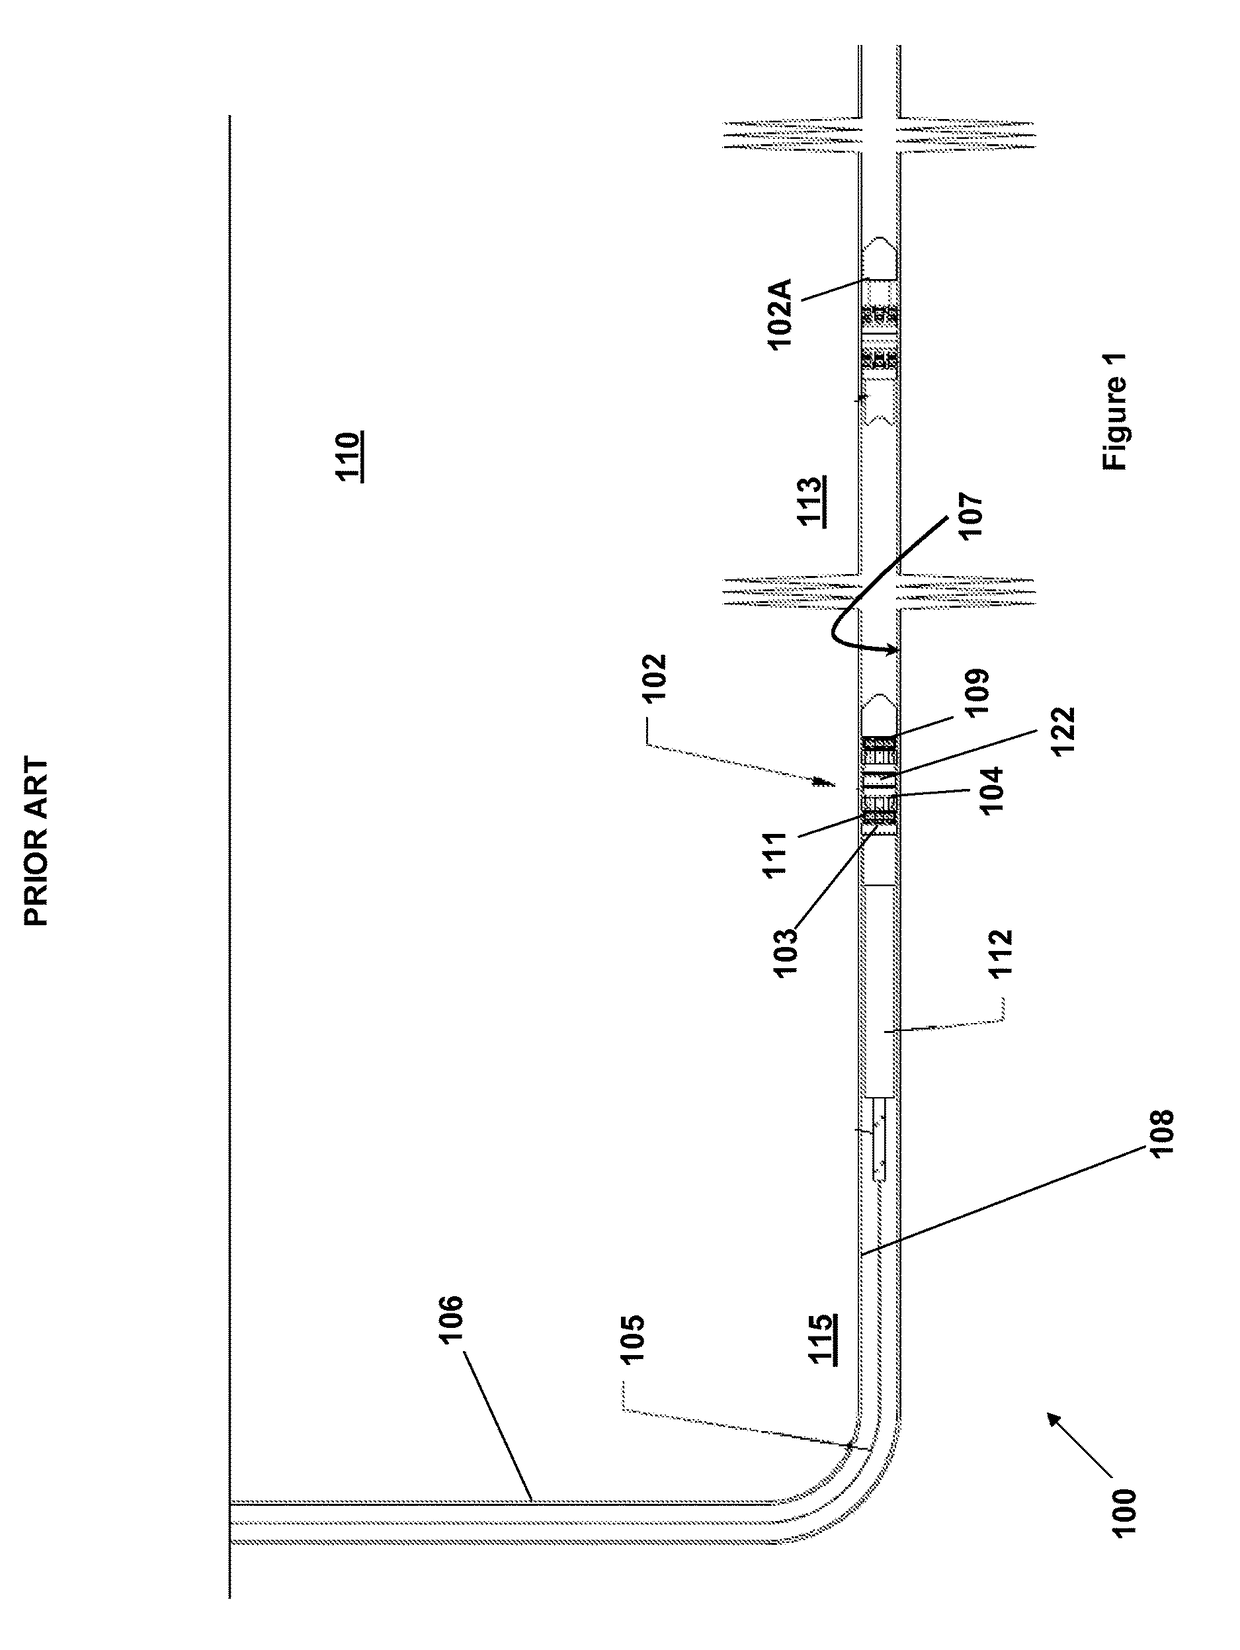 Downhole system for isolating sections of a wellbore